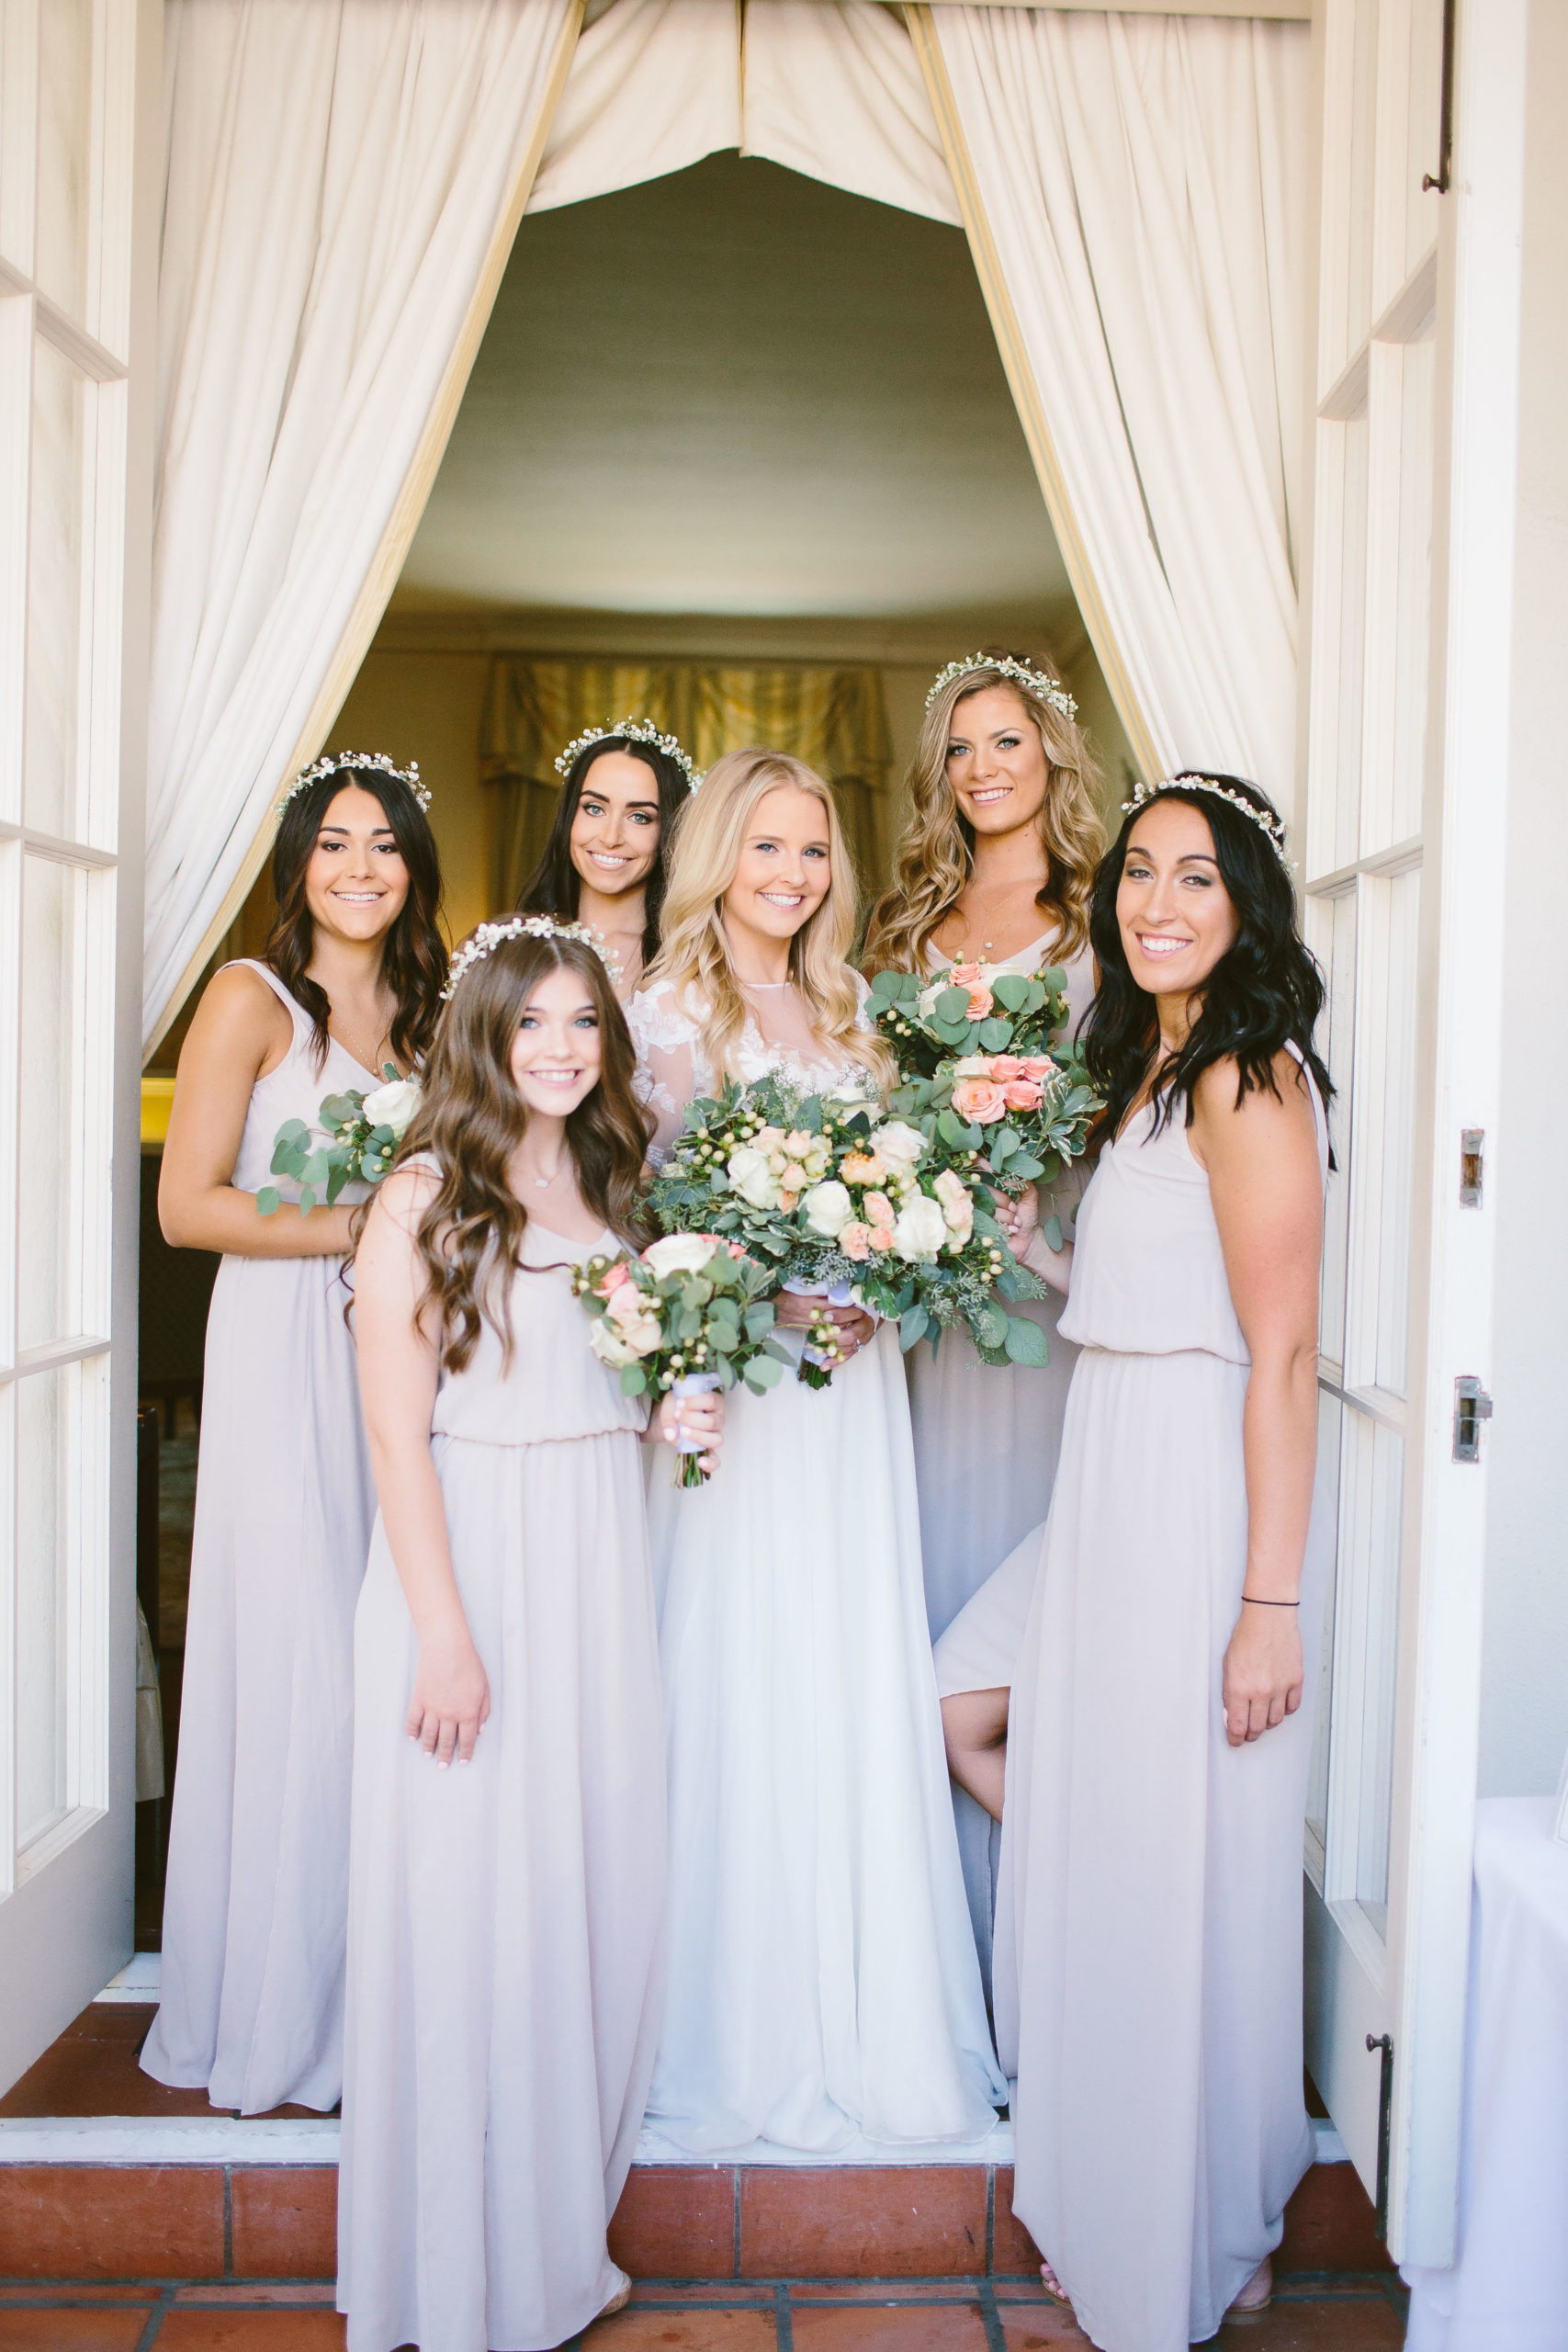  Loving these Show Me Your Mumu bridesmaid dresses and baby's breath flower crowns!  